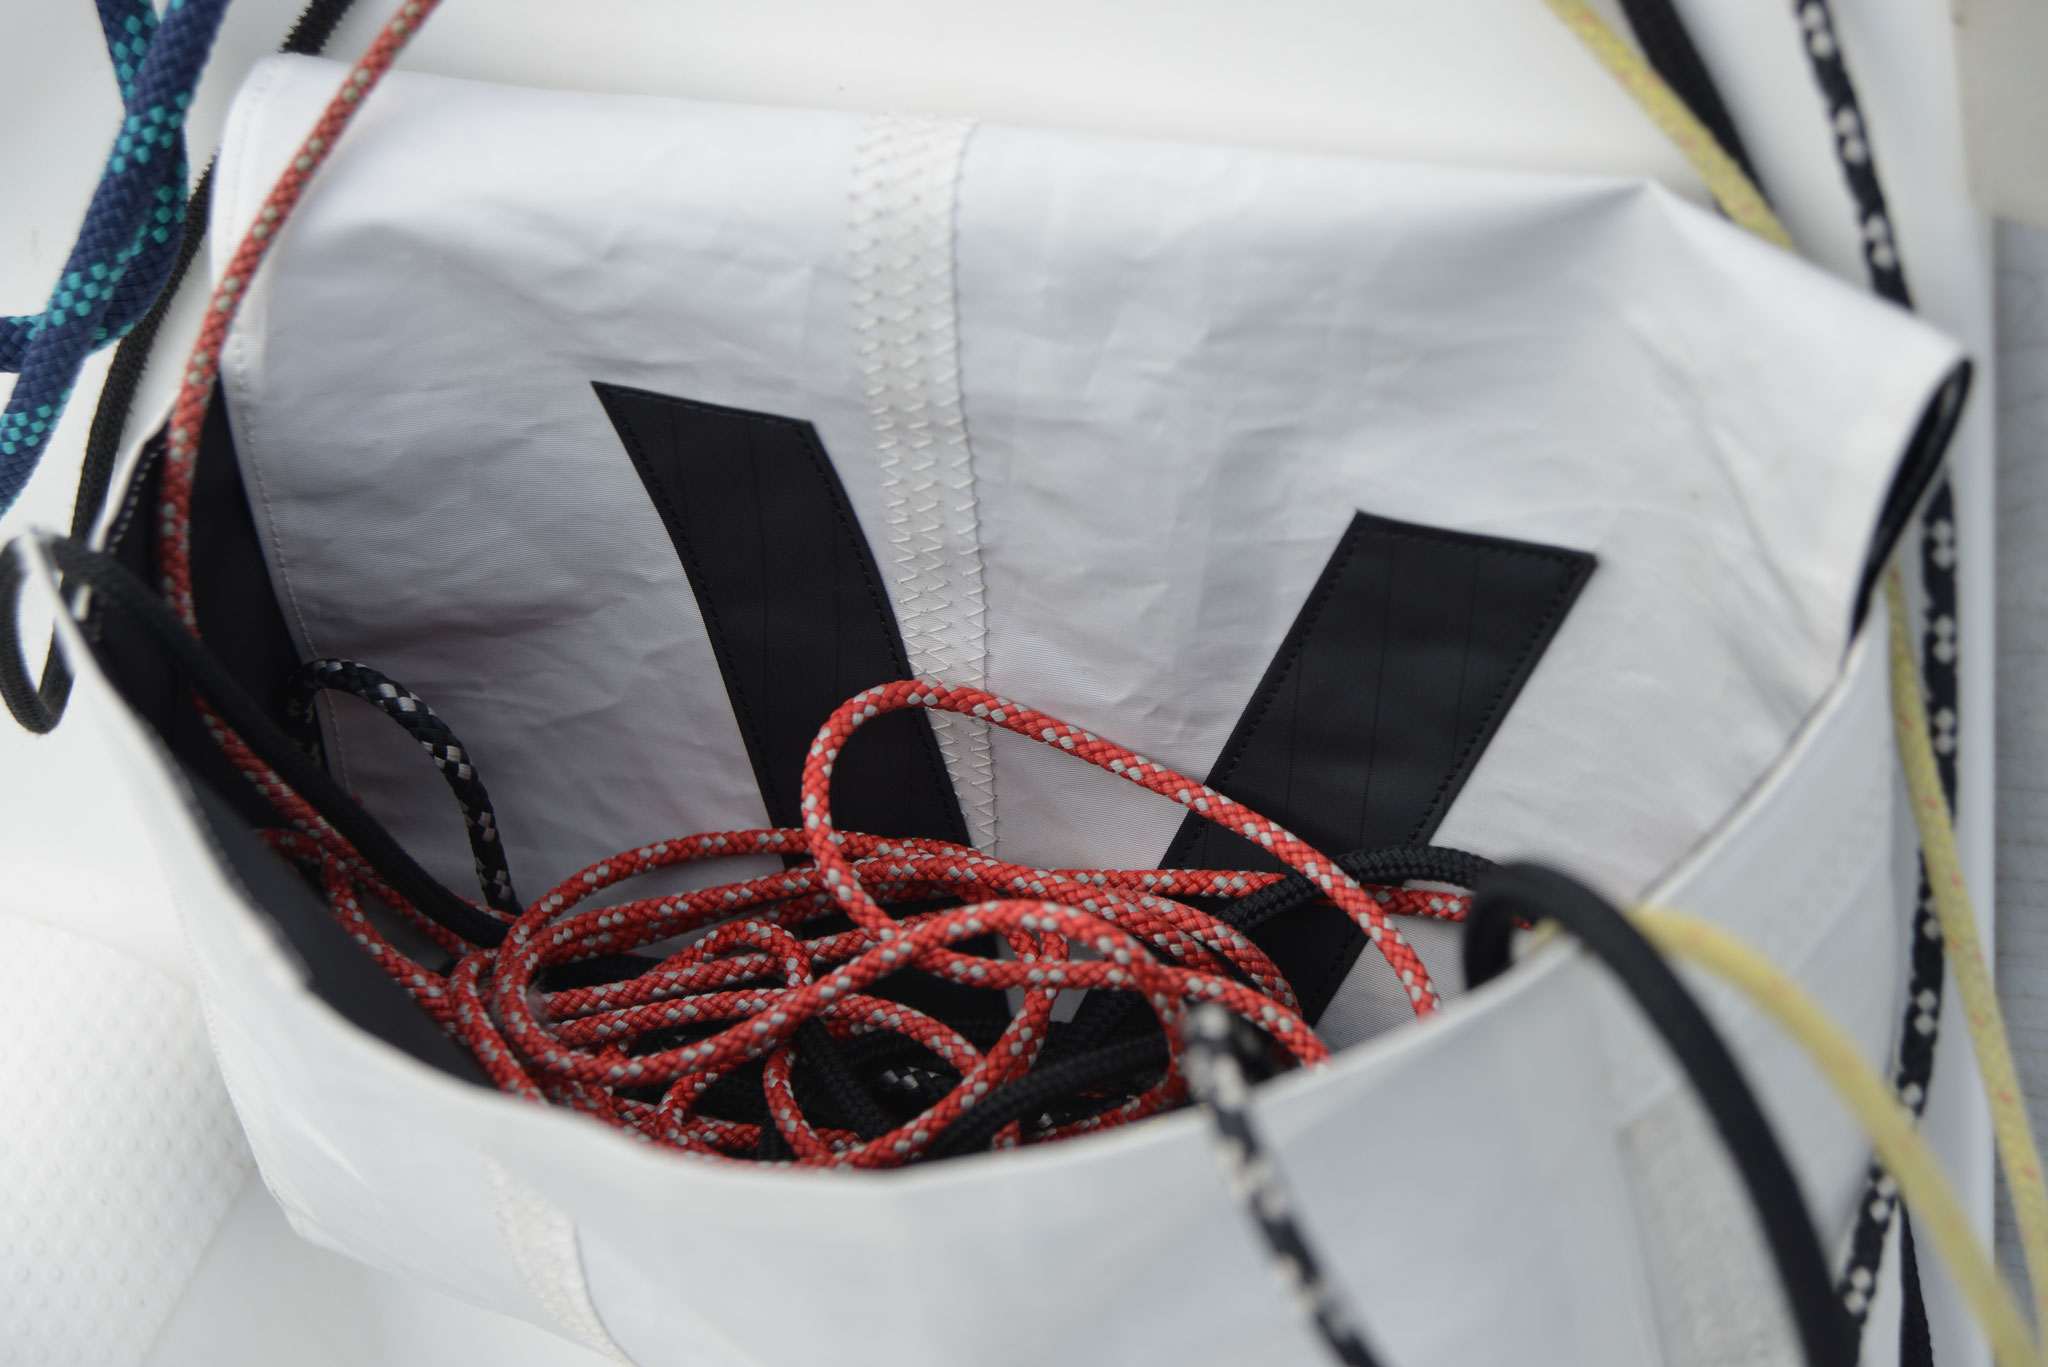 can be used closed with the side openings or open while sailing